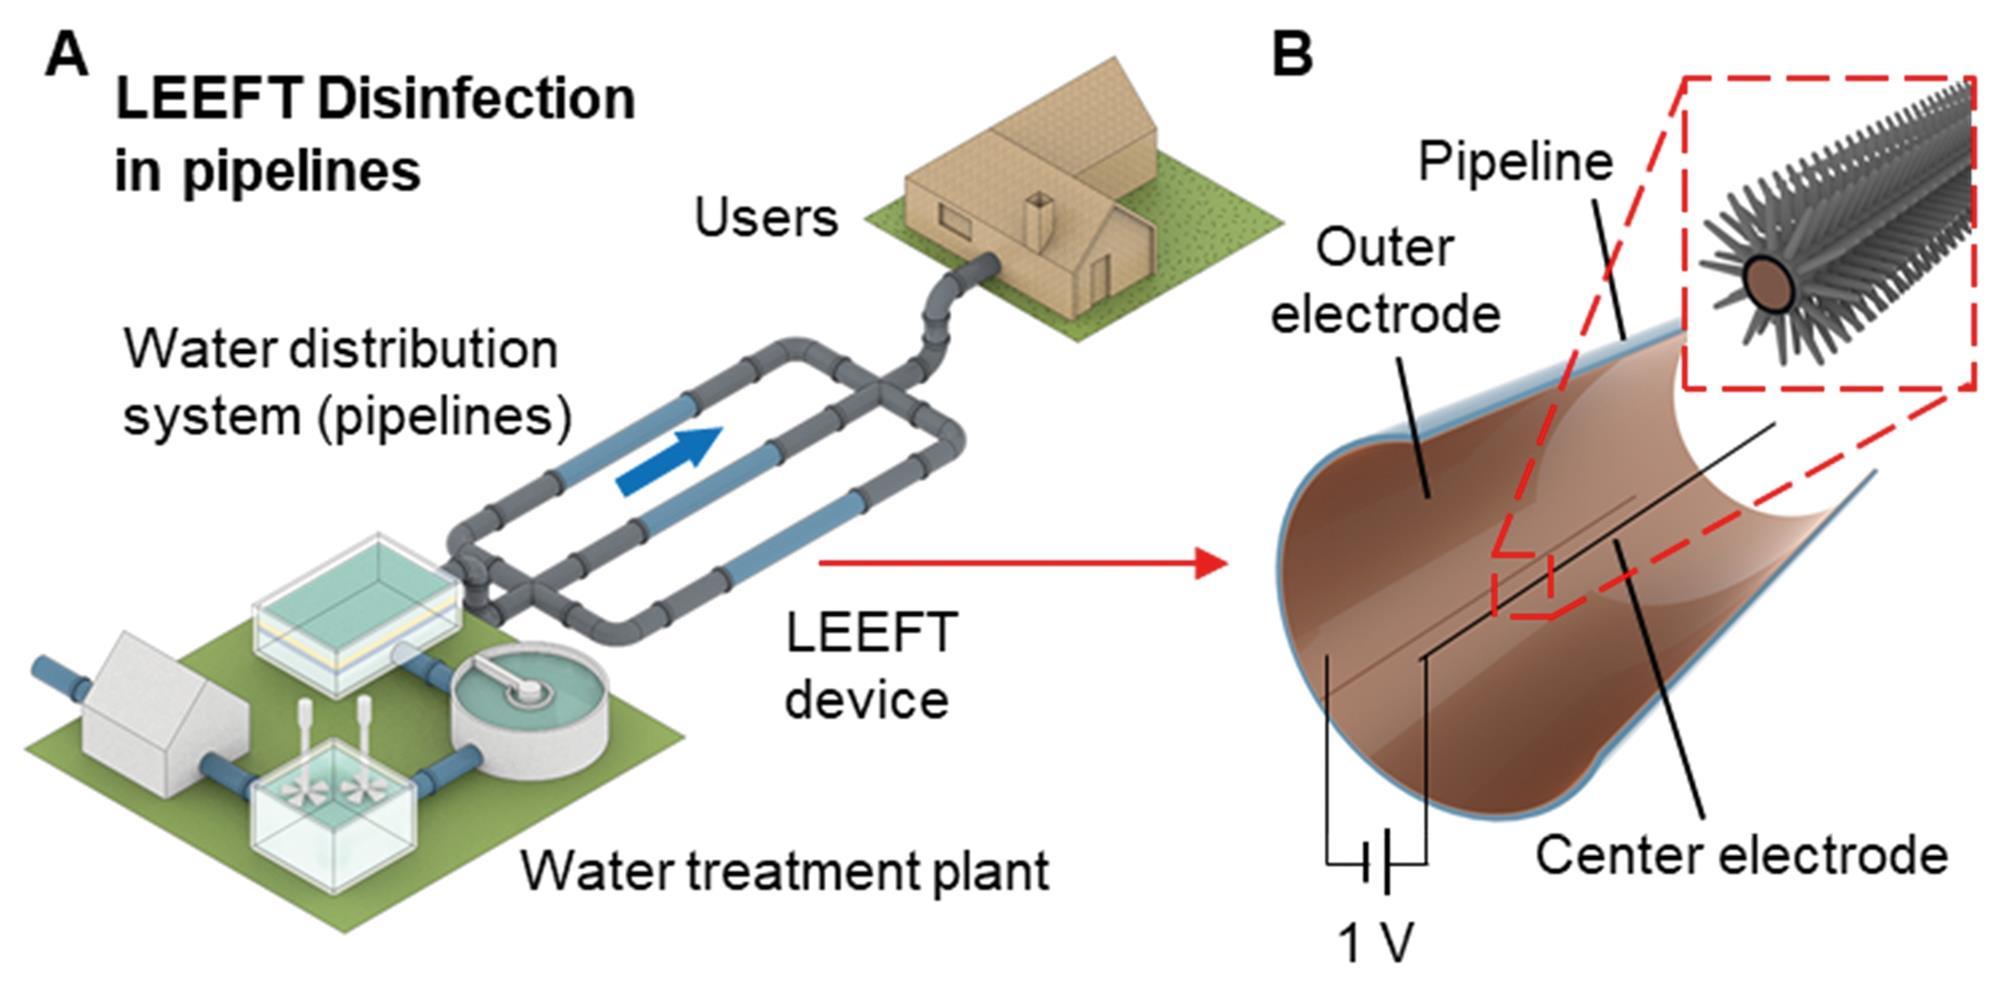 Water pipe technology kills microorganisms with localised electric field - Chemistry World